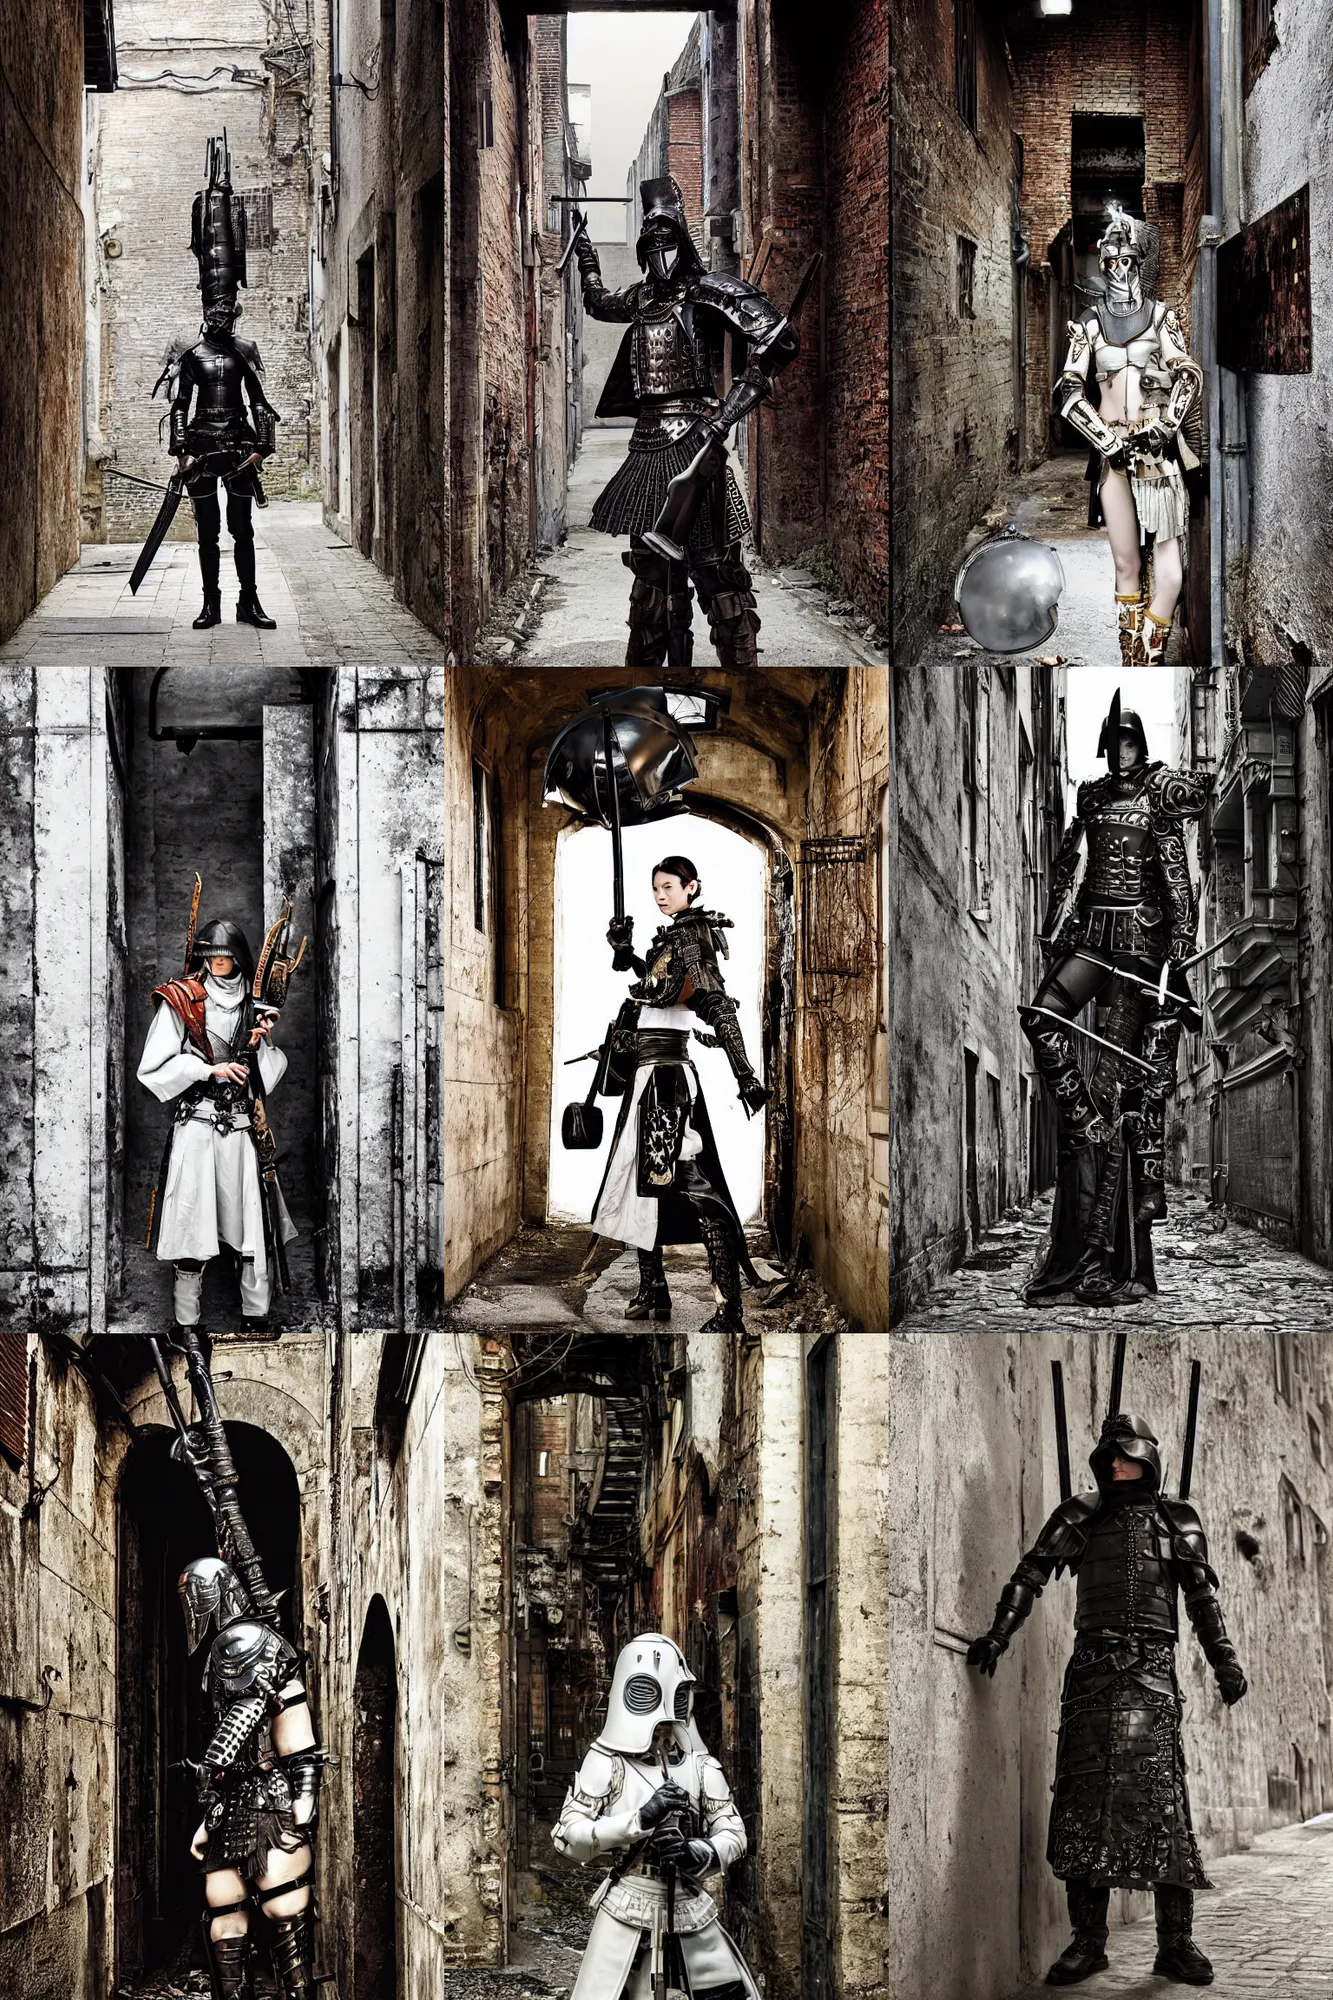 Prompt: fashion model with white ancestral ornate medieval tactical gear standing inside an alleyway, black leather samurai garment, long shot, dark abandoned city streets, by irving penn and storm thorgerson, ren heng, peter elson, alvar aalto